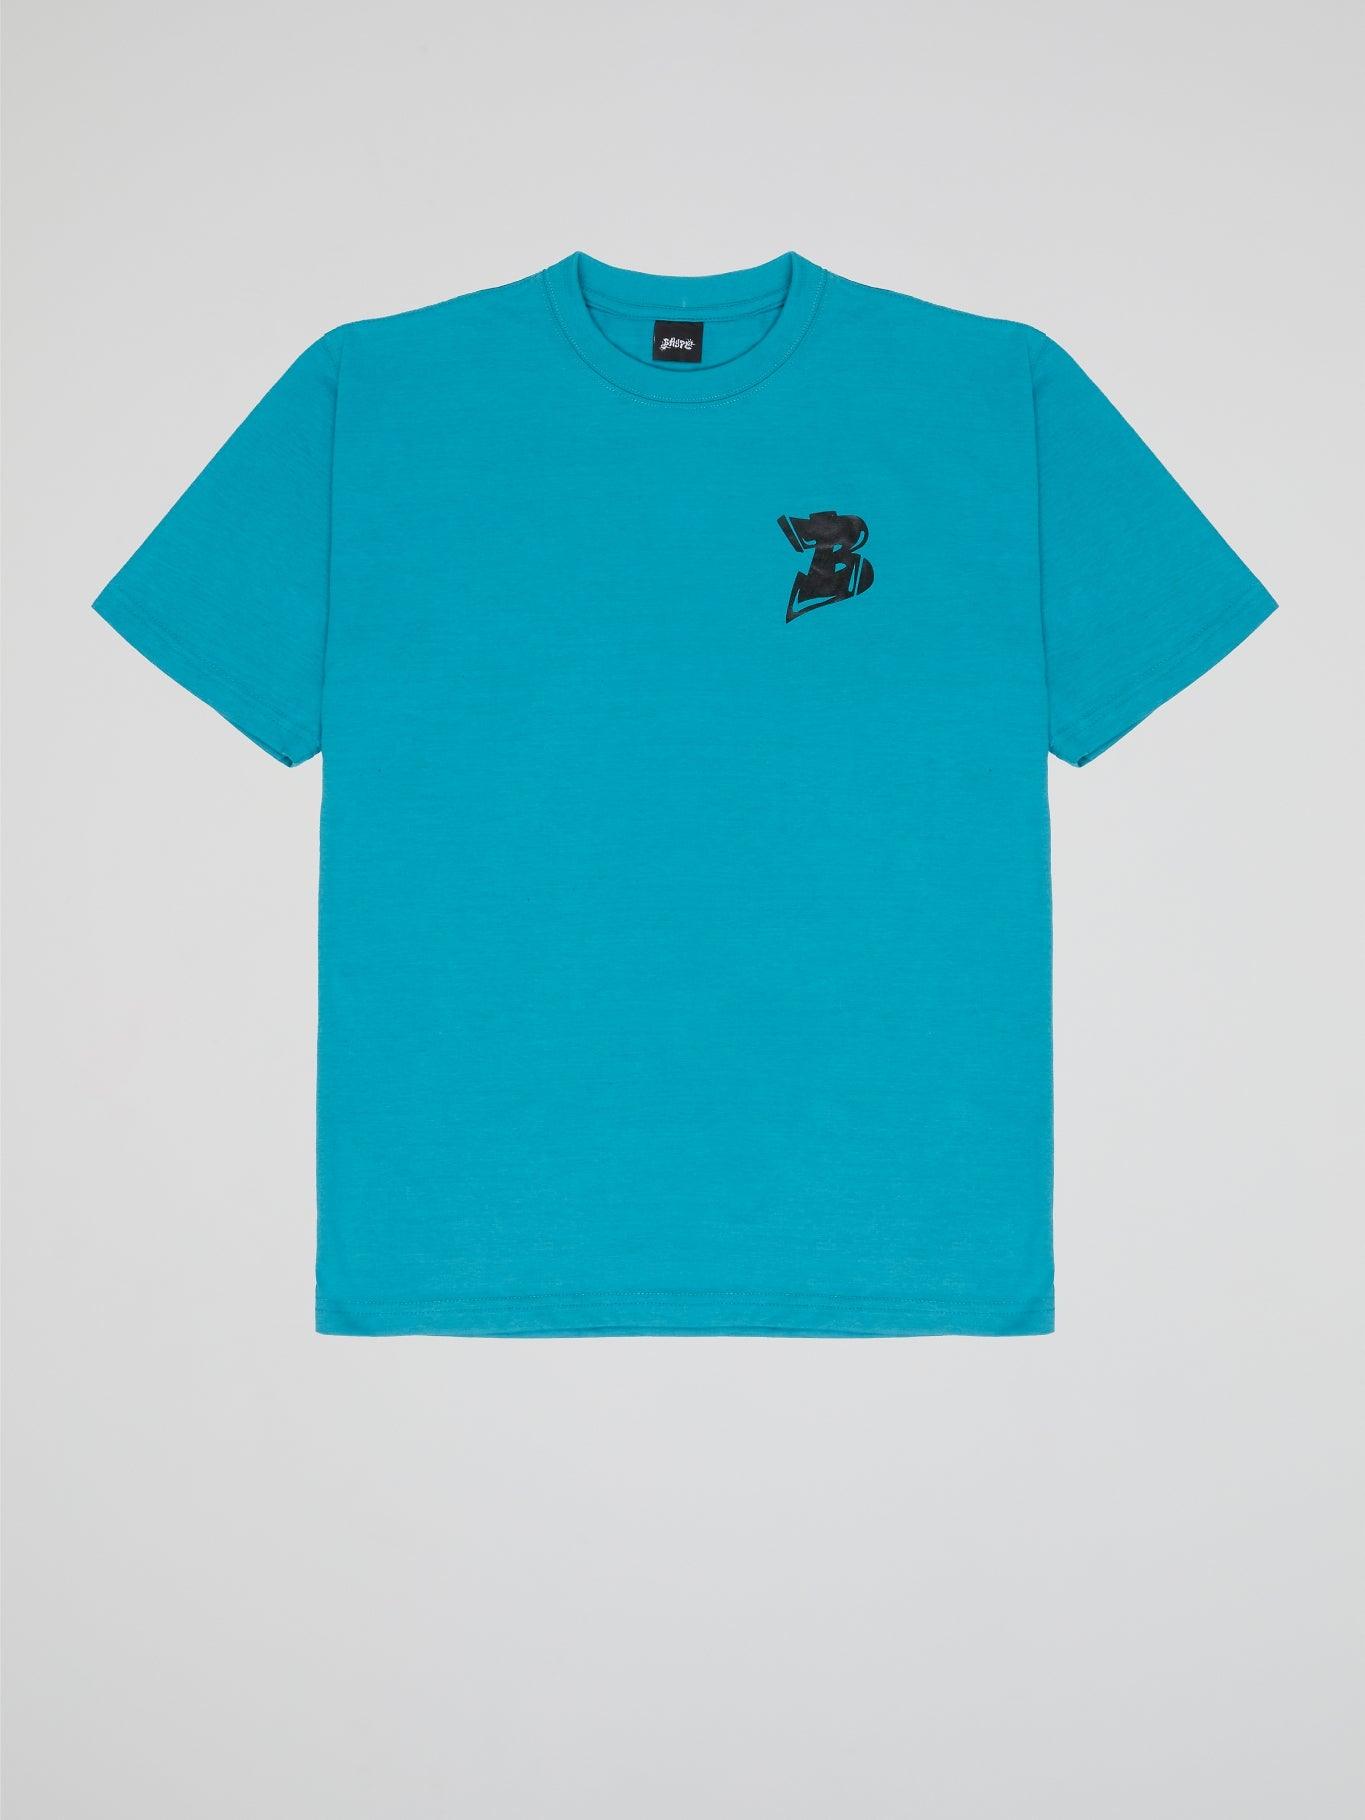 BHYPE LOGO ESSENTIALS TURQUOISE BLUE T-SHIRT - B-Hype Society